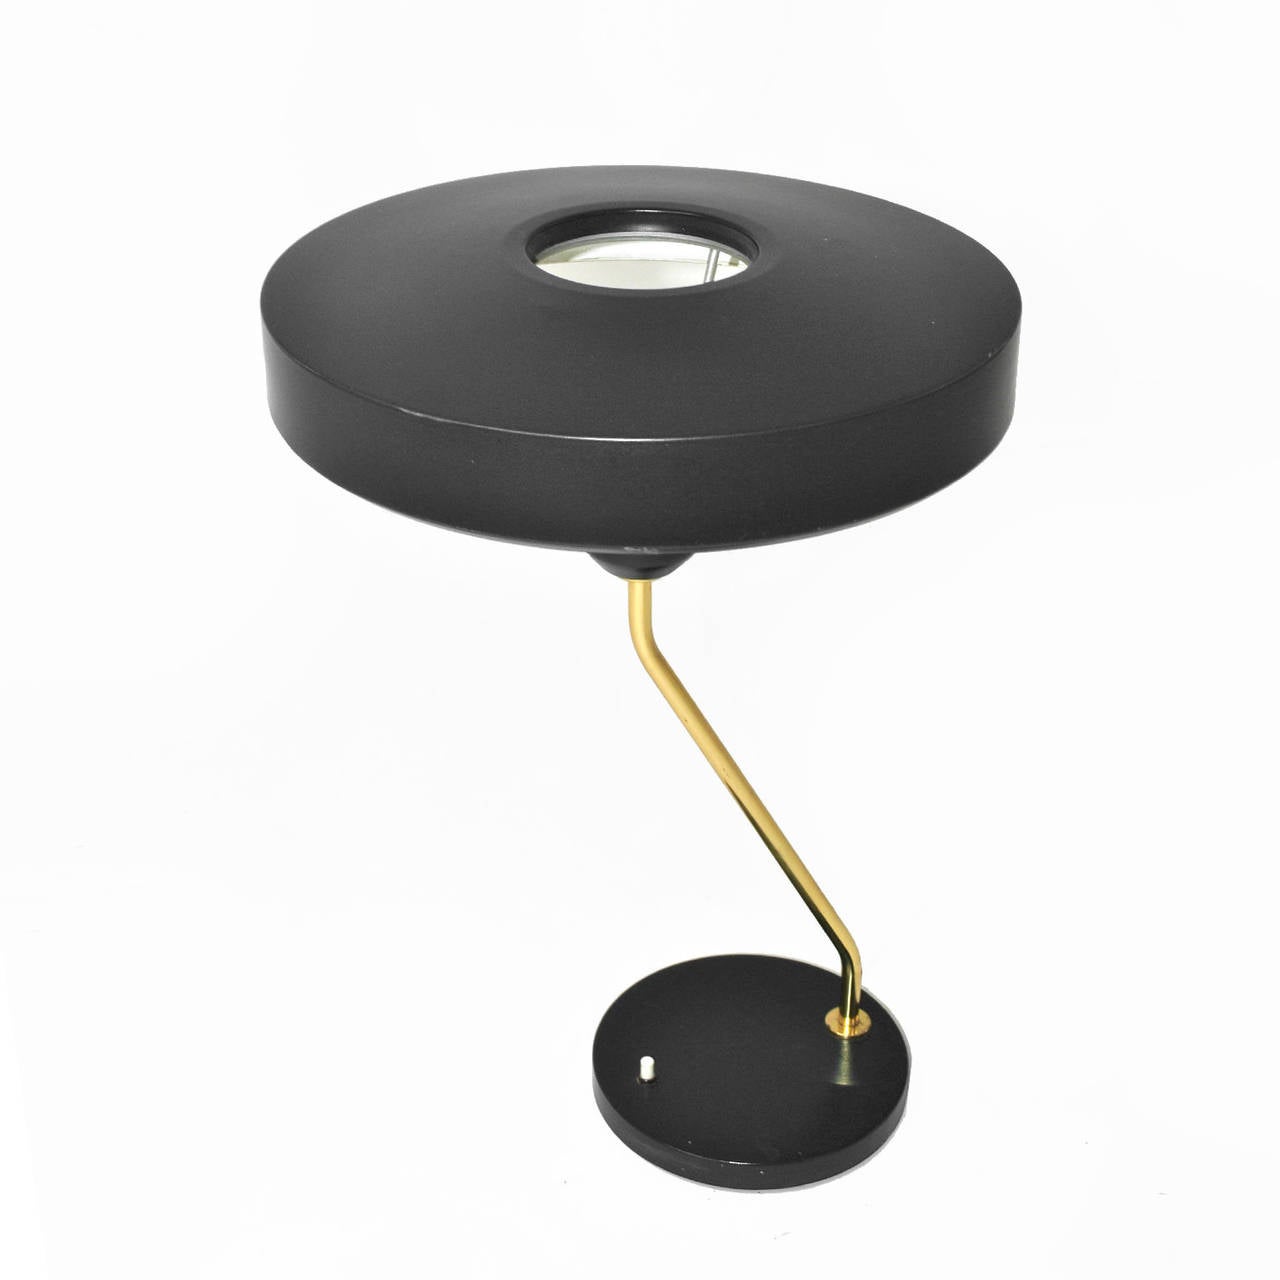 Table lamp designed by Louis Kalf for phillips, with structure made in brass with shade and base made in black lacquer metal.